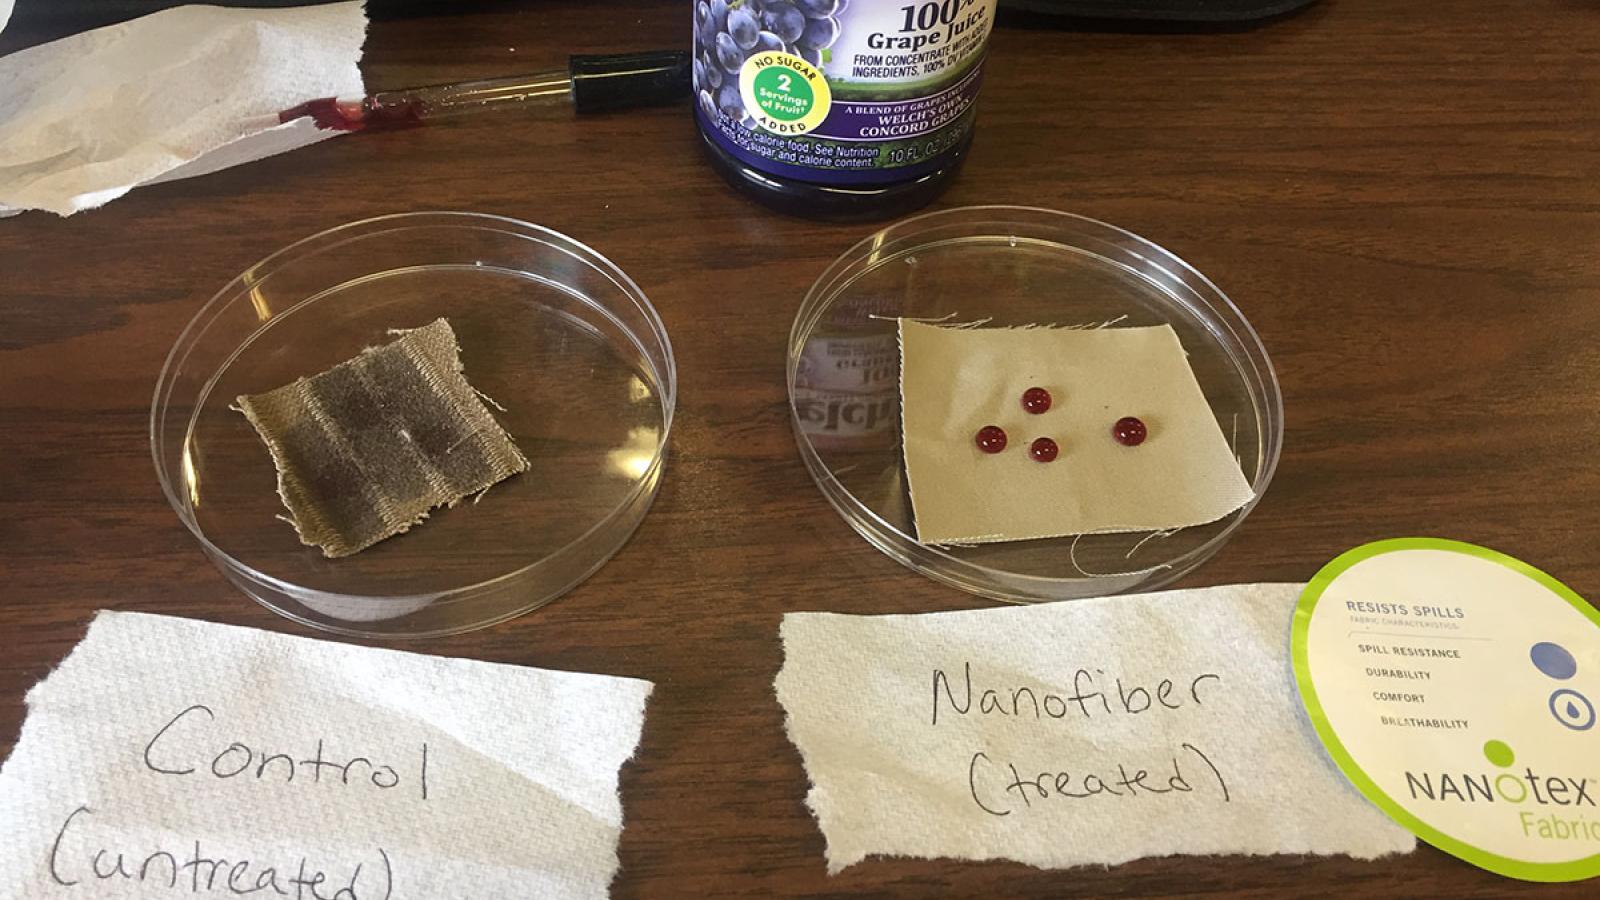 Photograph of a nanochemistry experiment showing untreated fabric vs. nanofiber fabric. The untreated fabric has the grape juice soaking in whereas the nanofiber fabric has droplets of grape juice and it is not sinking in. 